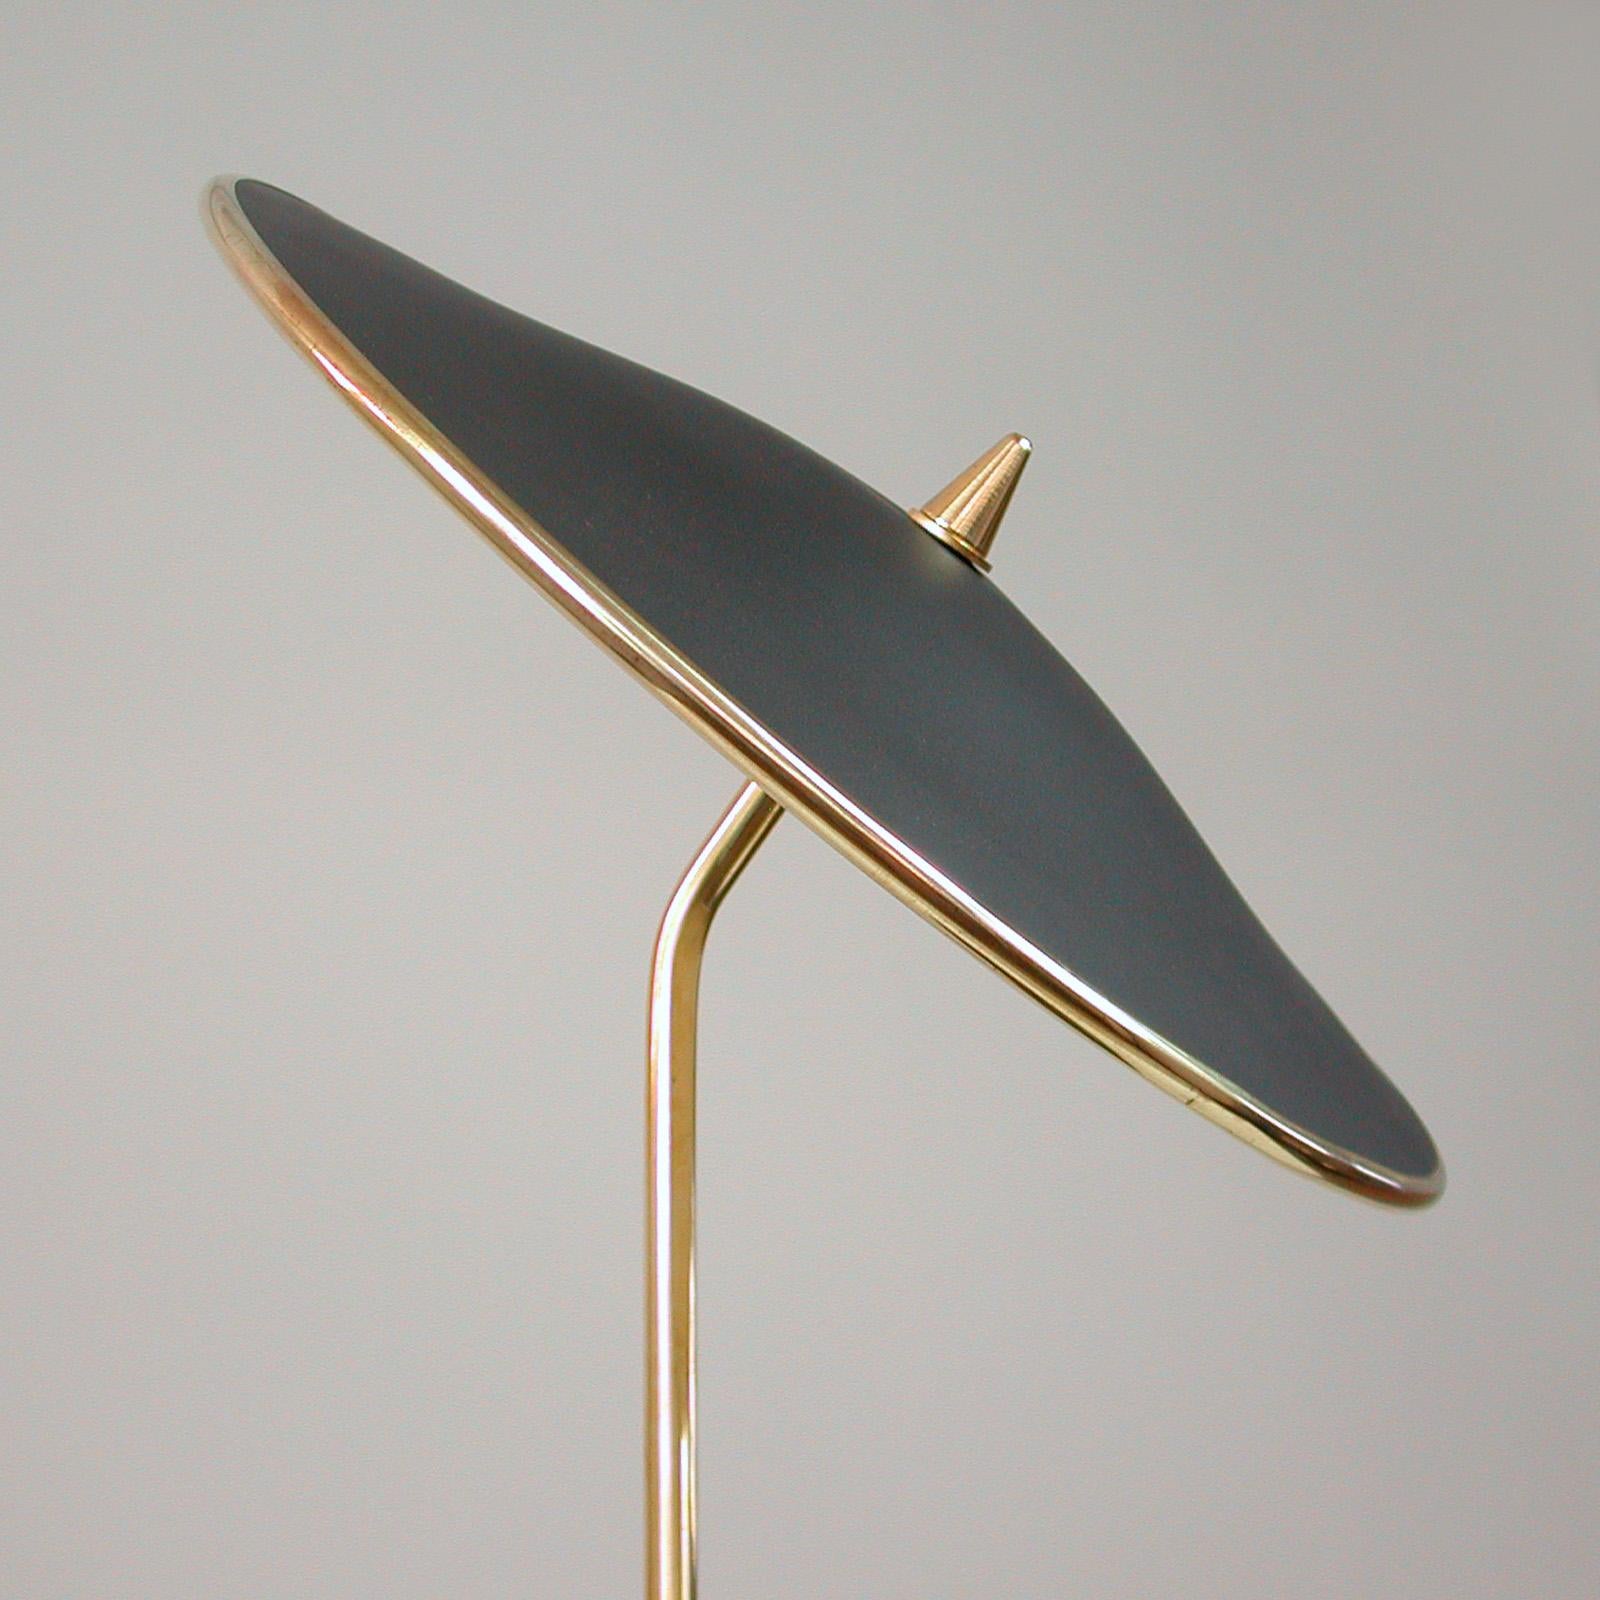 French Midcentury Reflecting Black and Brass Table Lamp, 1950s For Sale 9